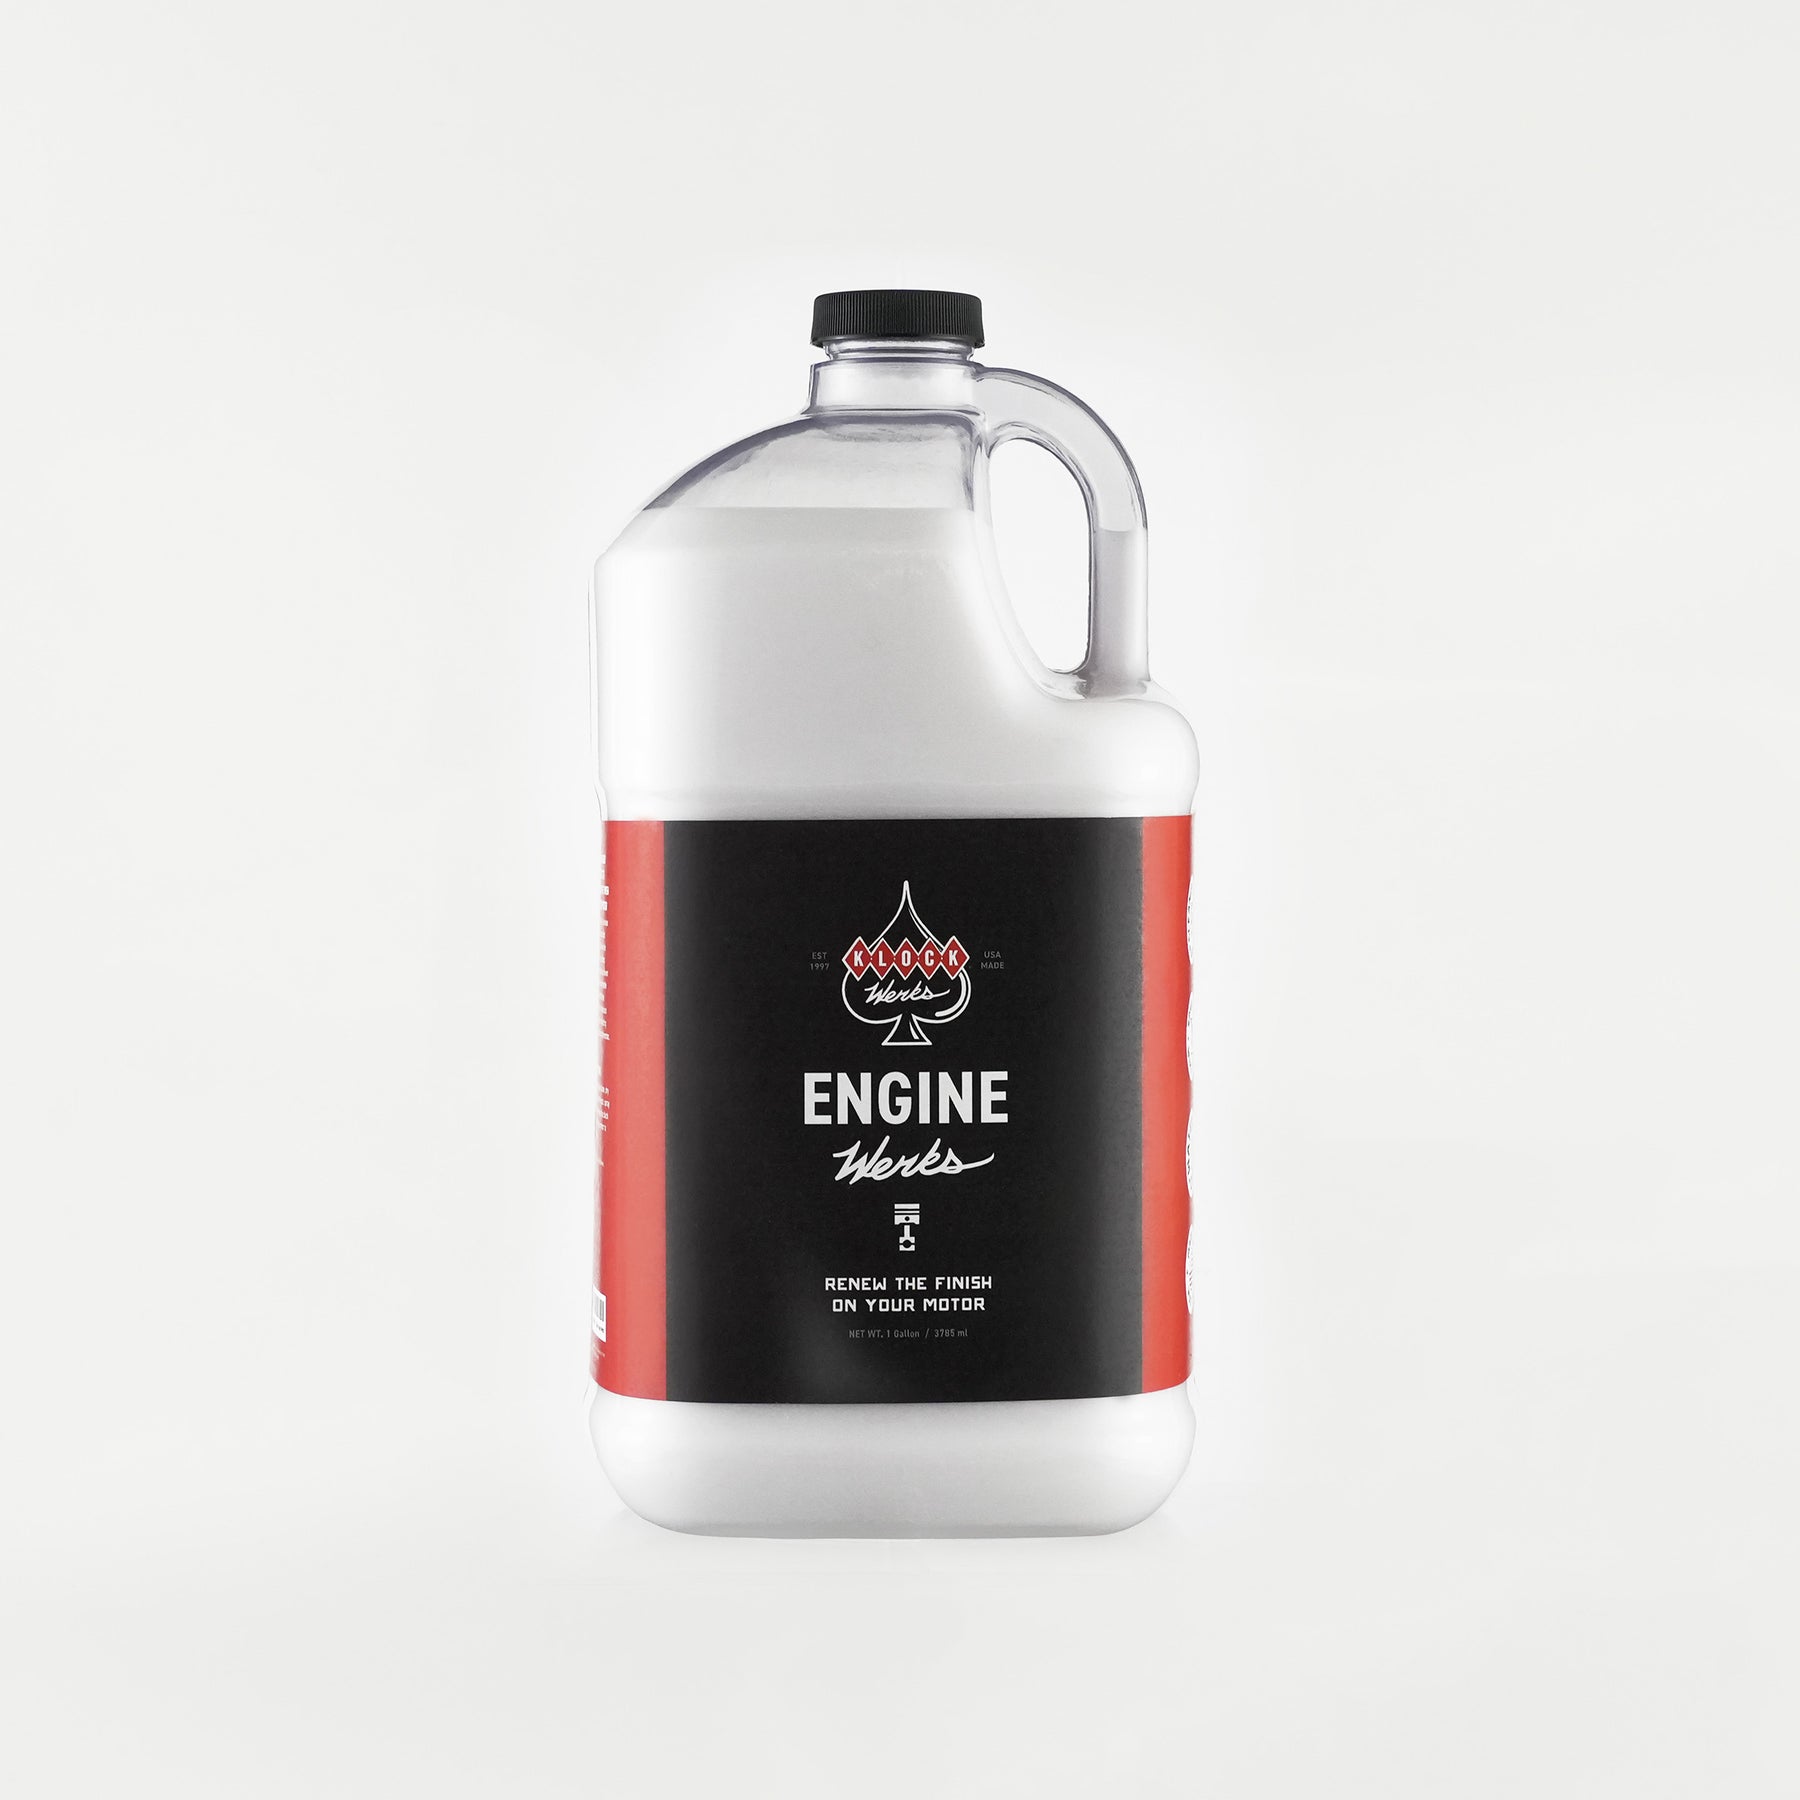 Gallon Engine Werks cleaning product bottle